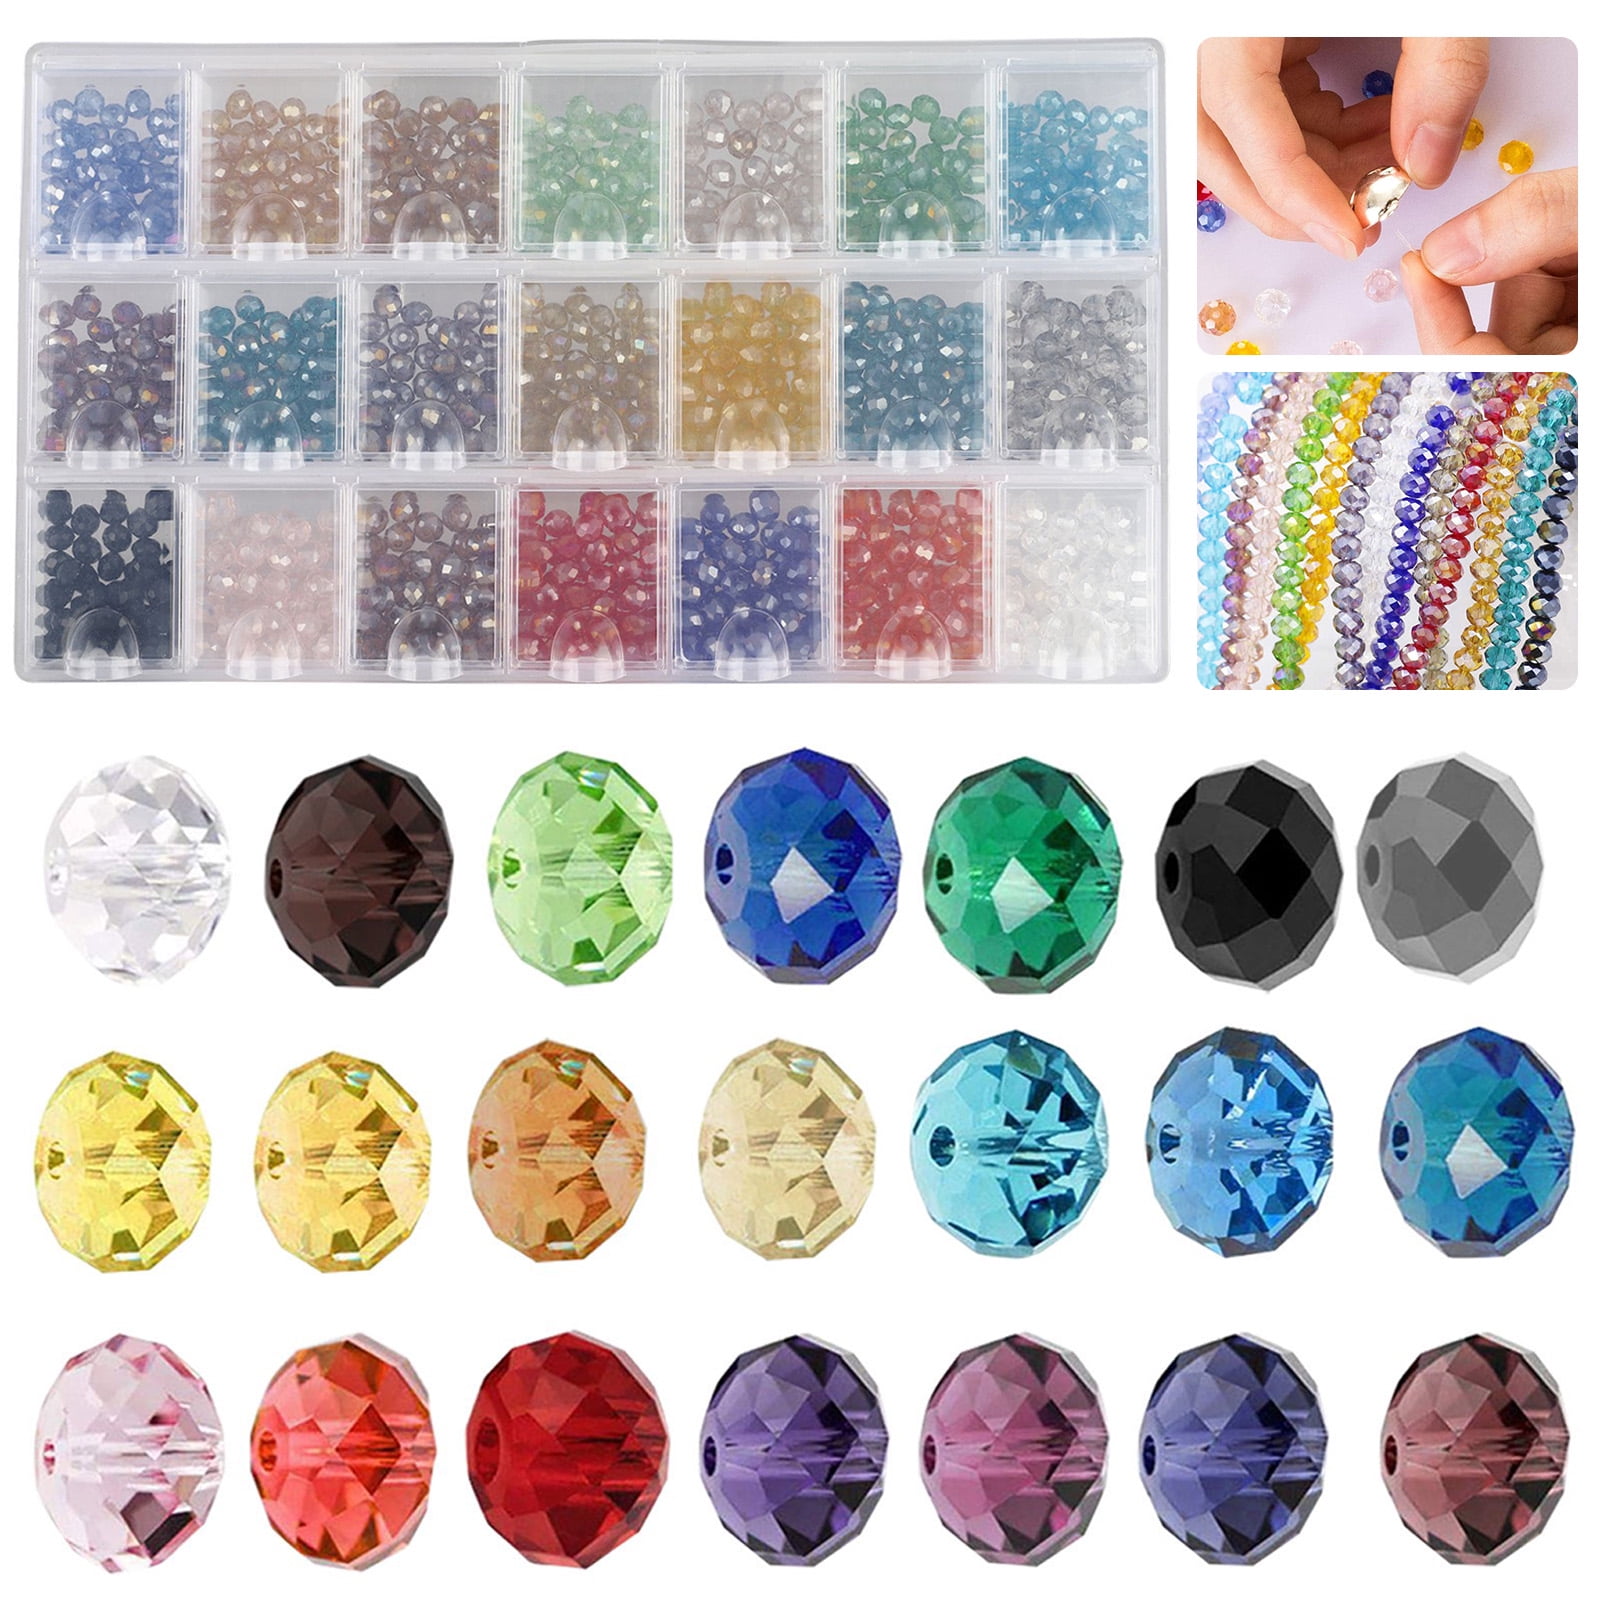 Lot 10/20x 12mm Flower Inside Faceted Rondelle Loose Lampwork Glass Spacer Beads 